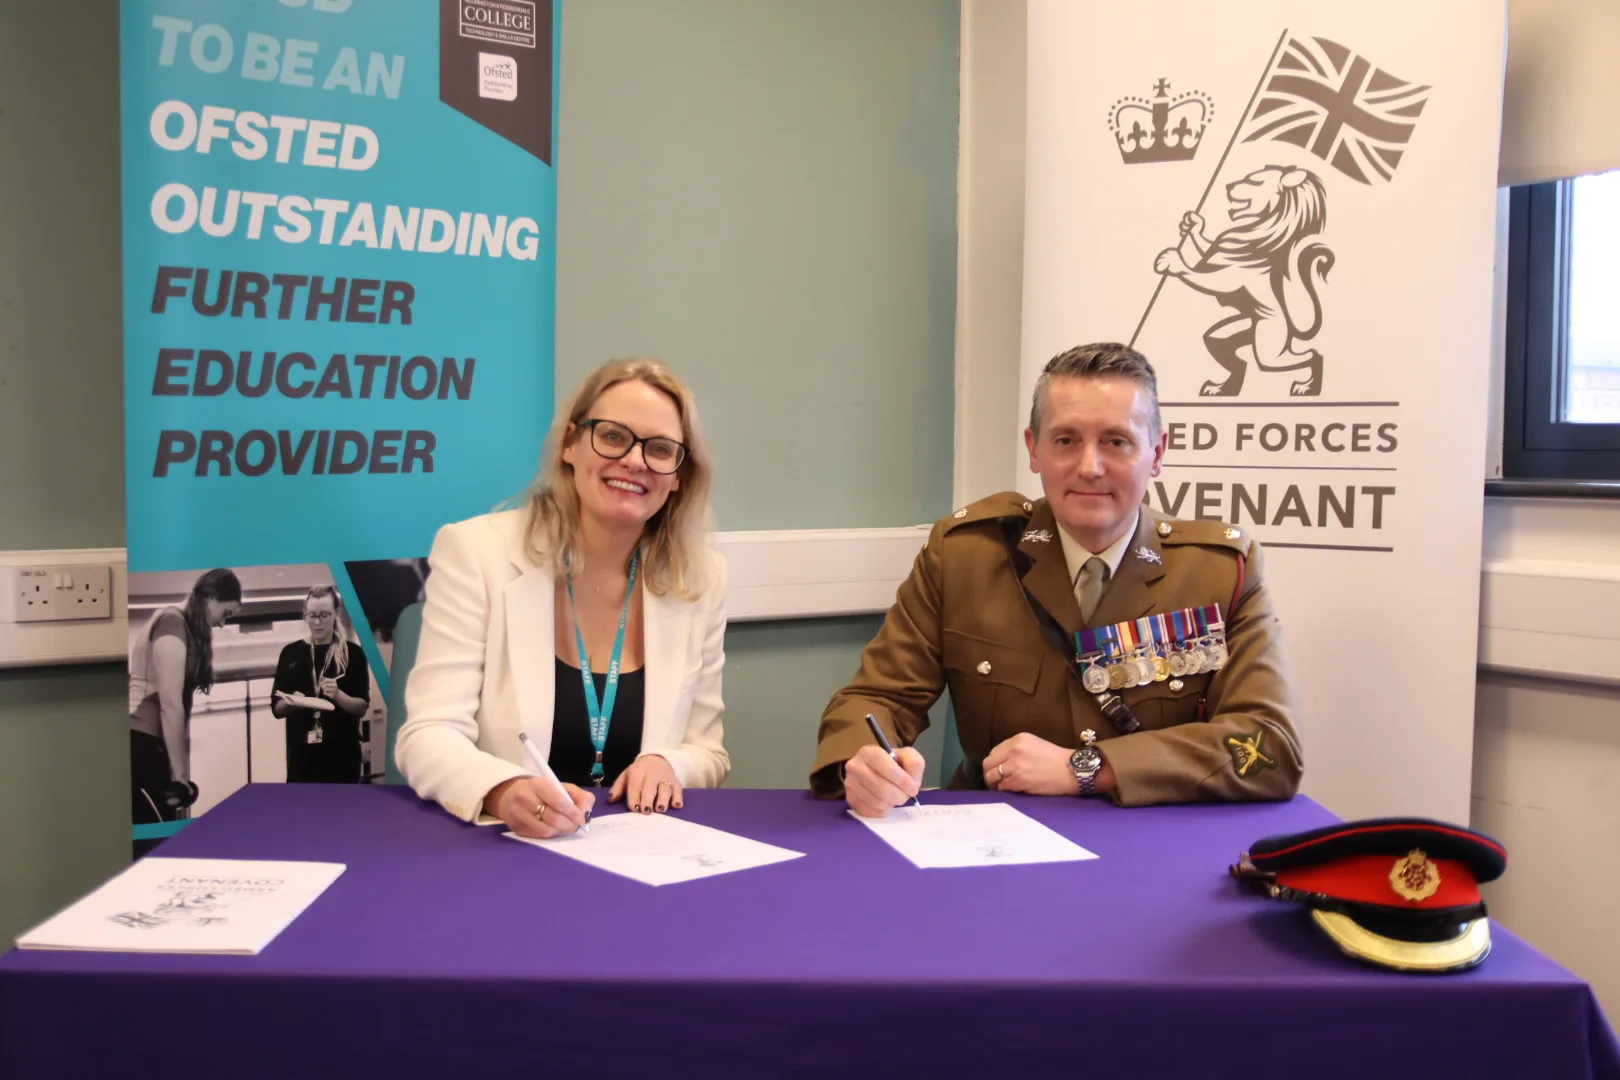 Local College shows their commitment to veterans by signing the Armed Forces Covenant